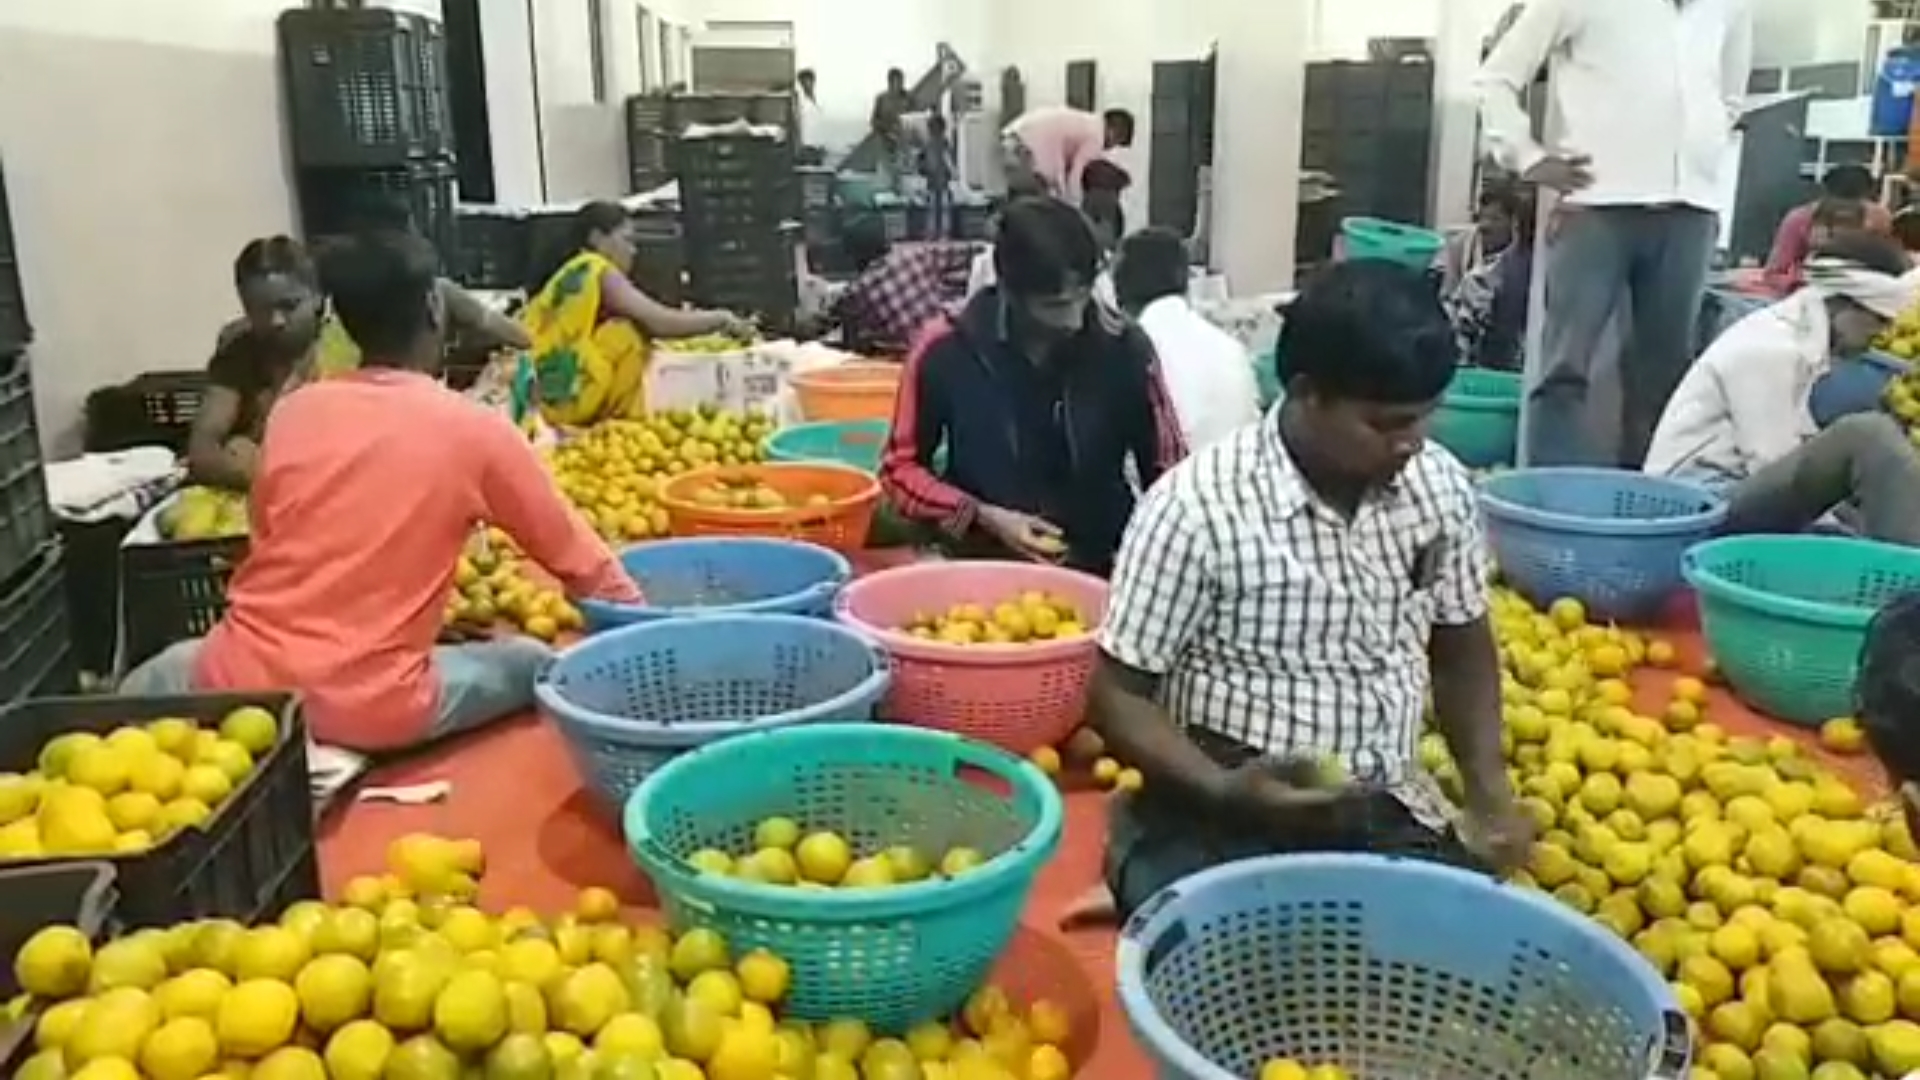 Workers preparing oranges to be sold in the market